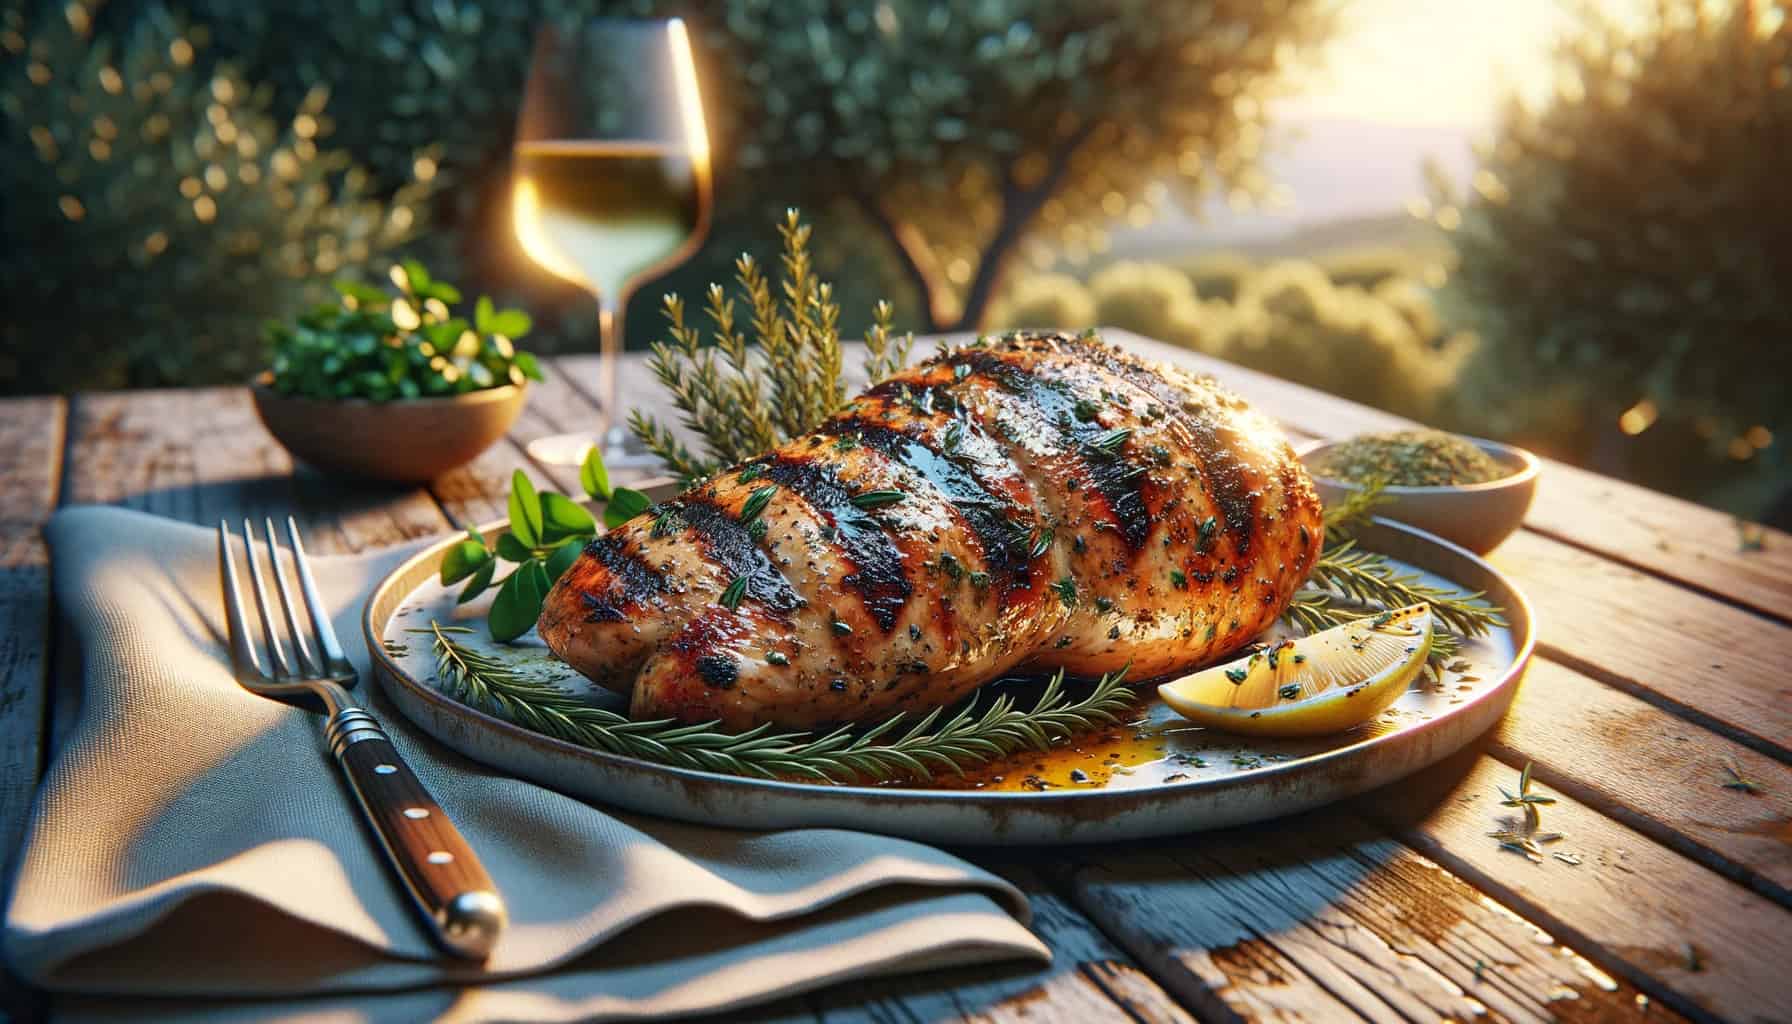 Mediterranean herb-grilled chicken. A plate holds a perfectly grilled chicken breast, with char marks and a golden-brown hue, marinated in a mix of mediterranean herbs such as rosemary, thyme, and oregano.